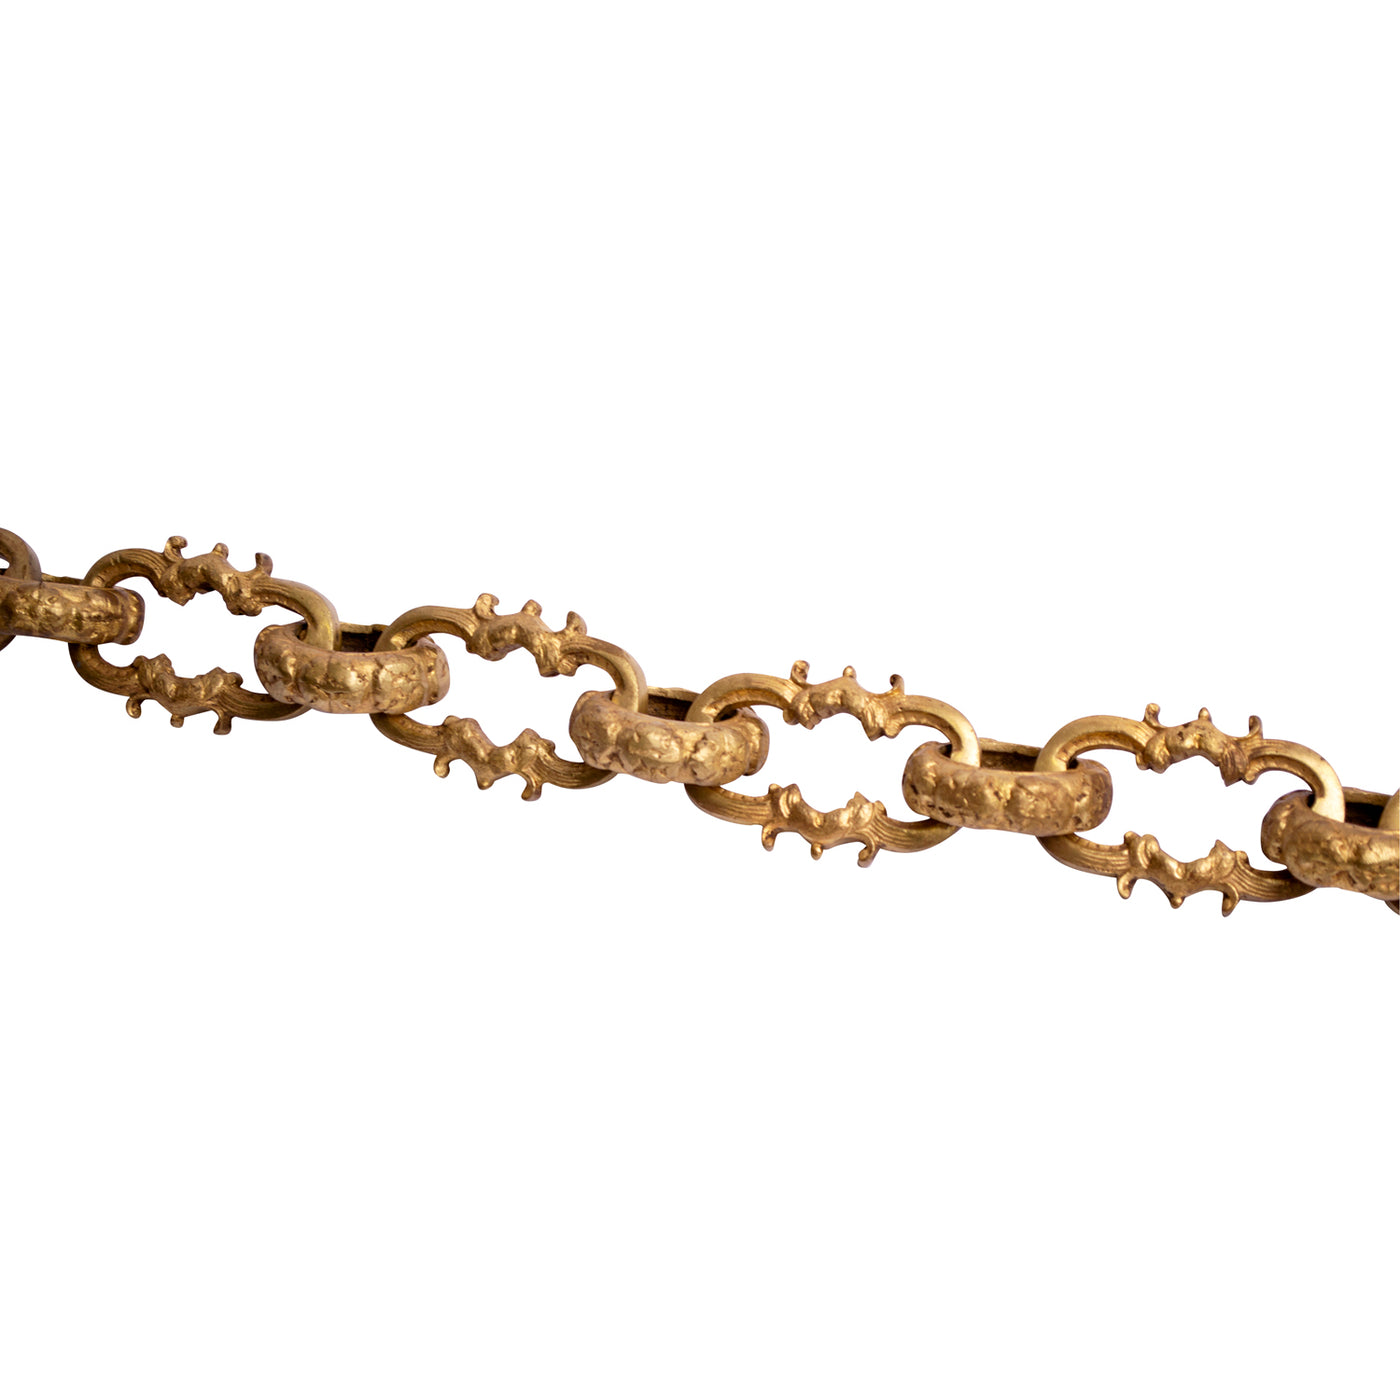 1 Foot Solid Brass Ornate Chain